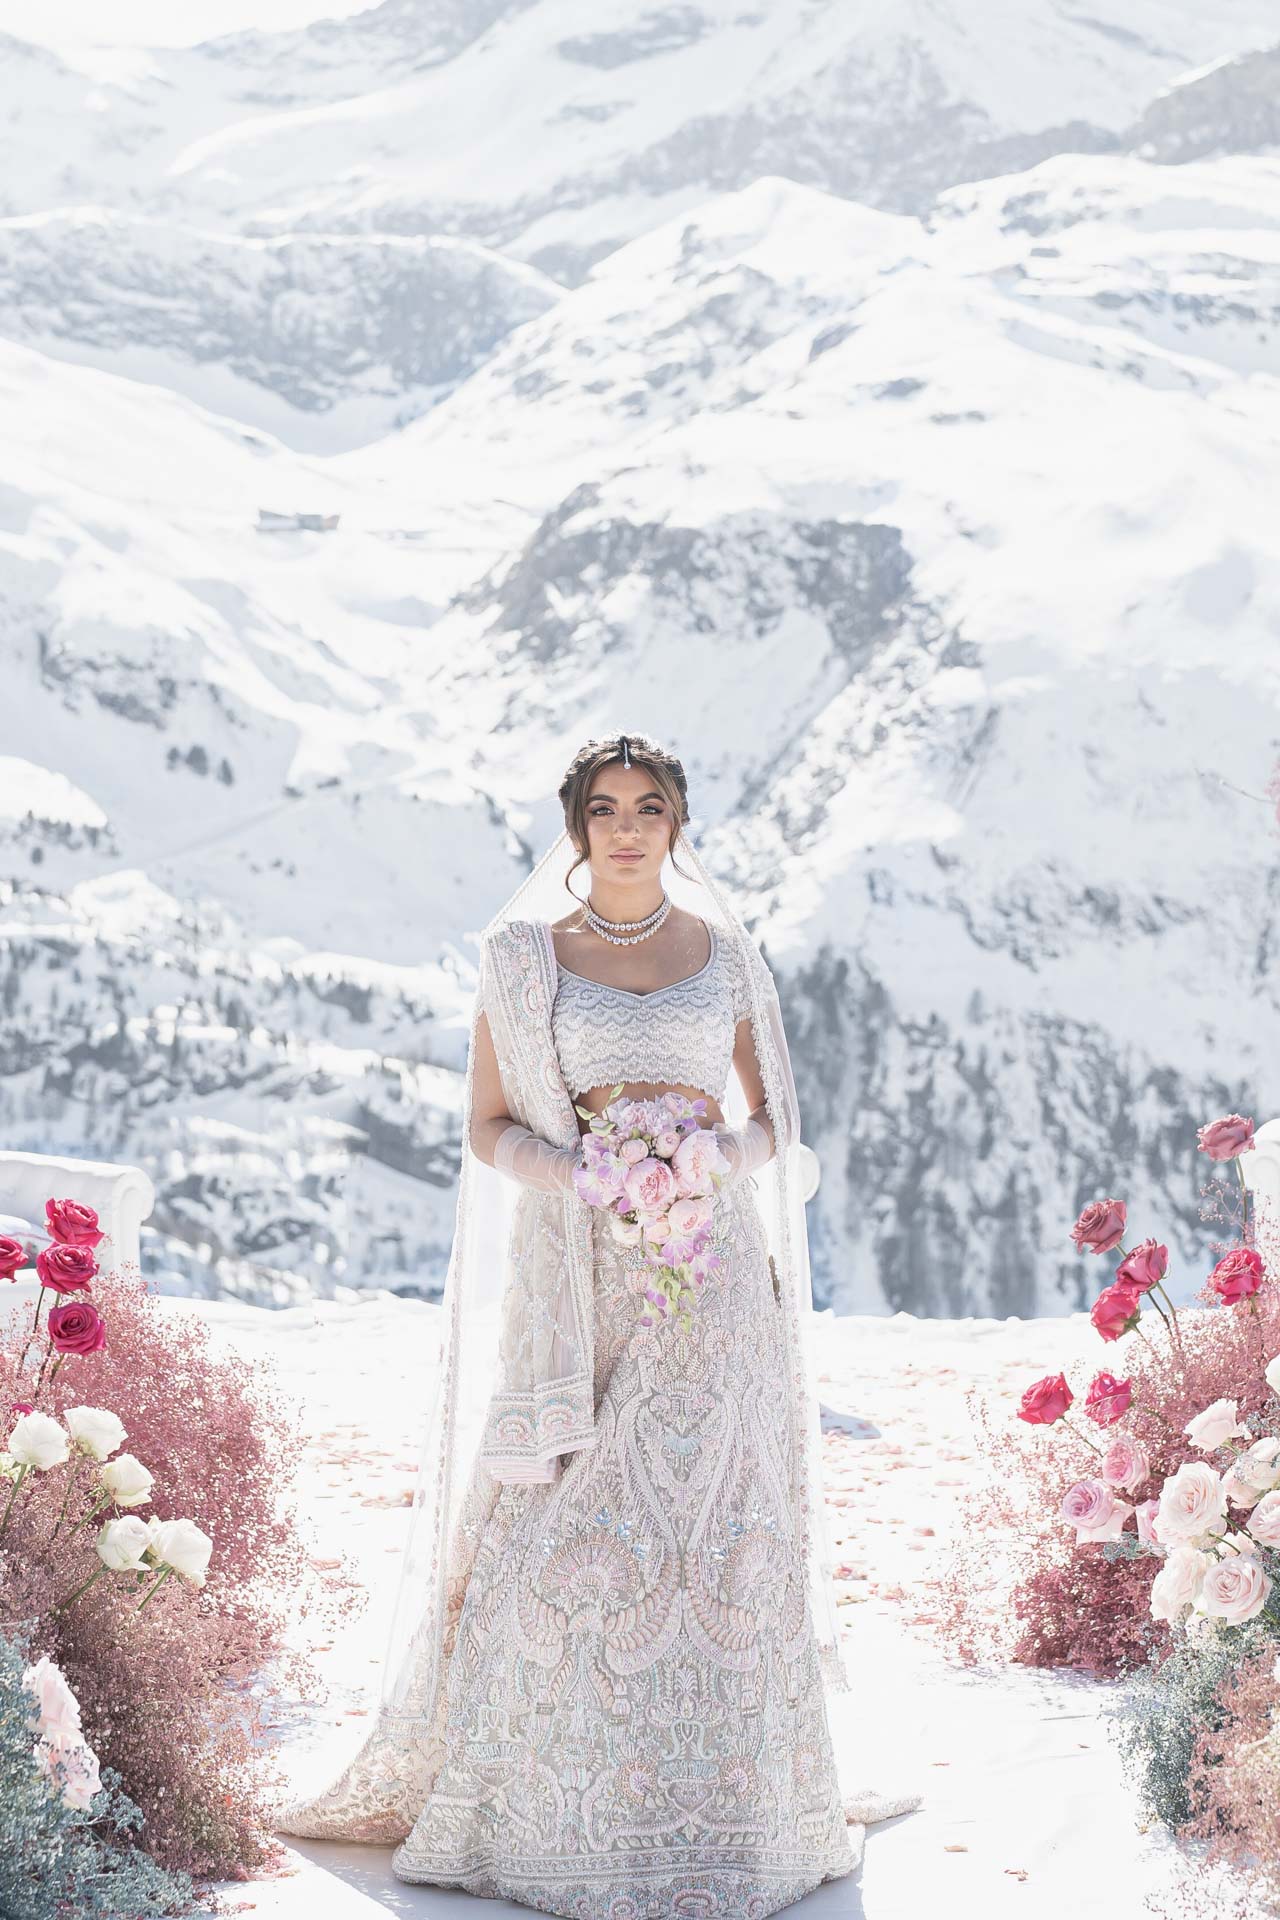 A wedding on the slopes of Matterhorn mountain, between the white of snow and the colors of India :: 43